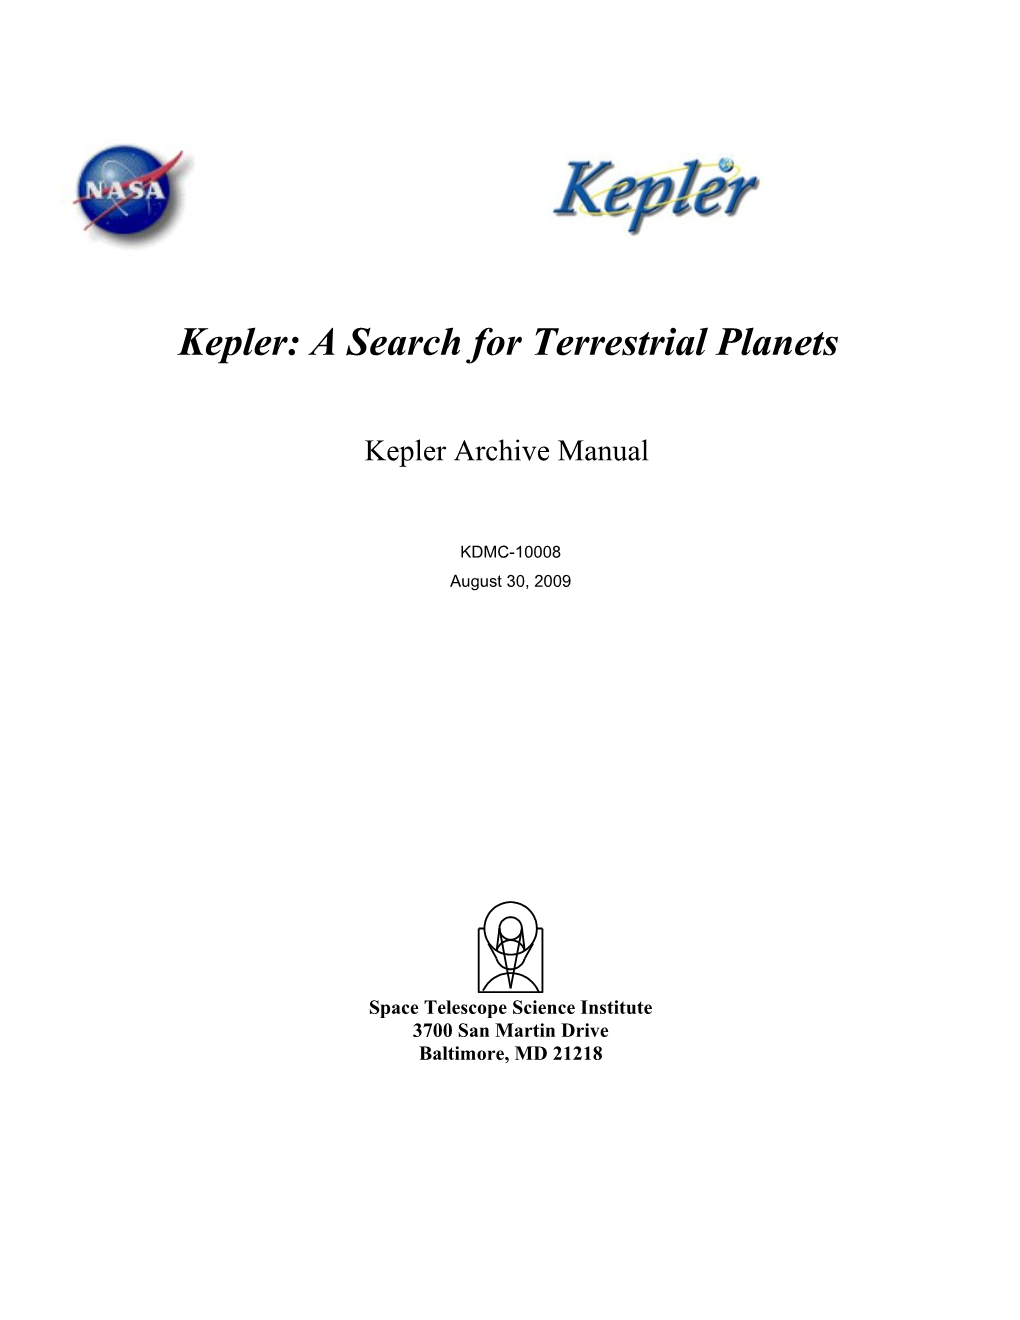 Kepler: a Search for Terrestrial Planets